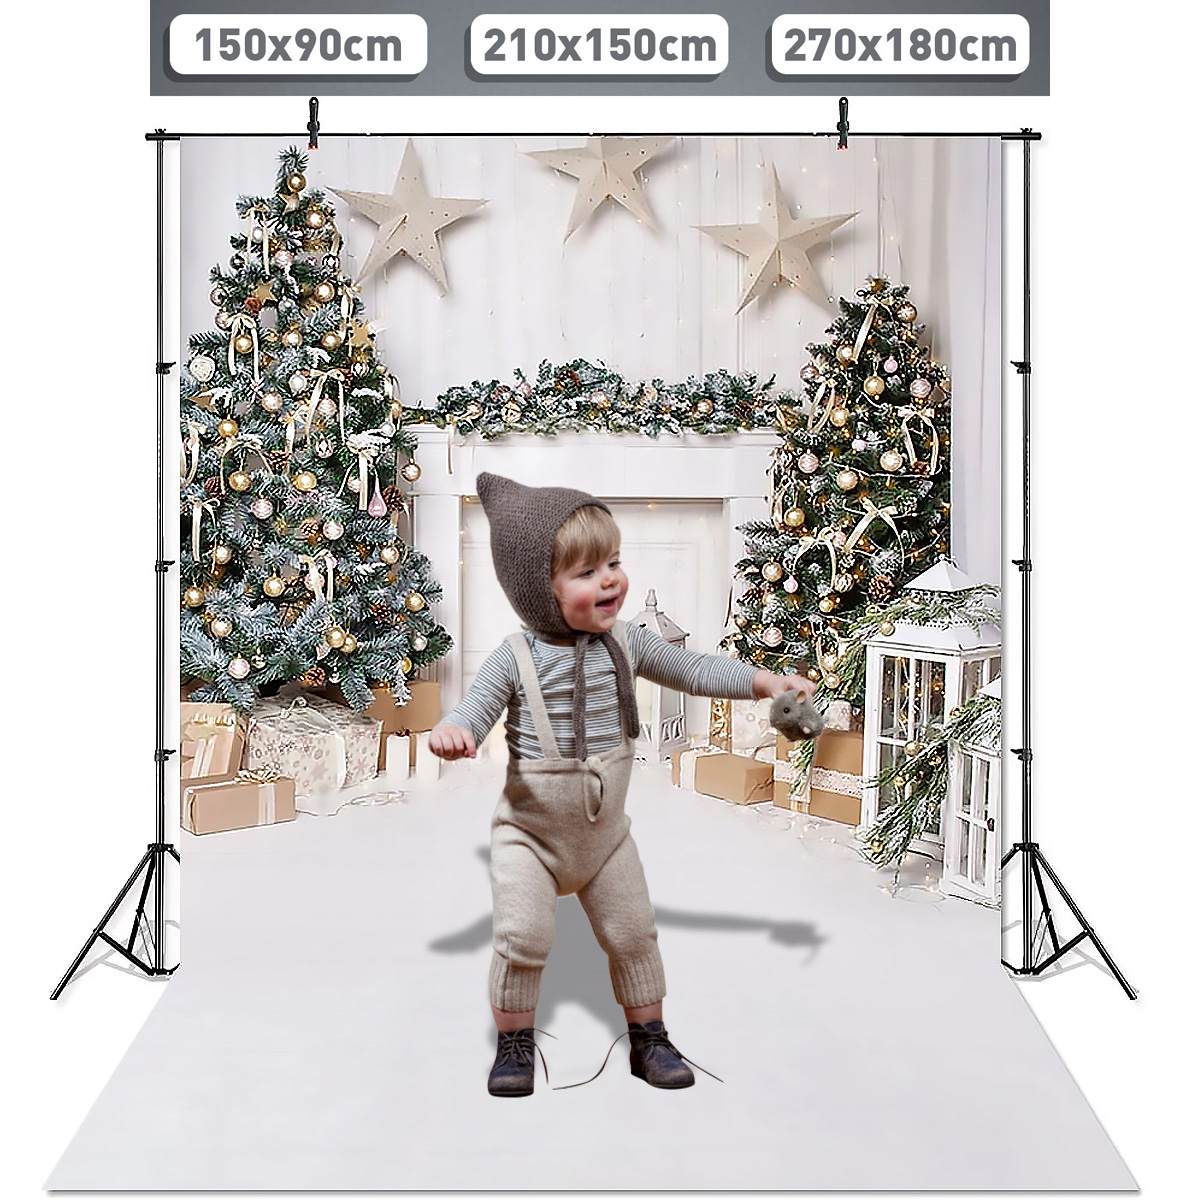 2020 Christmas White Fireplace StarsPhotography Background Waterproof Backdrop Wall Cloth 180x270cm/150x210m/90x150cm